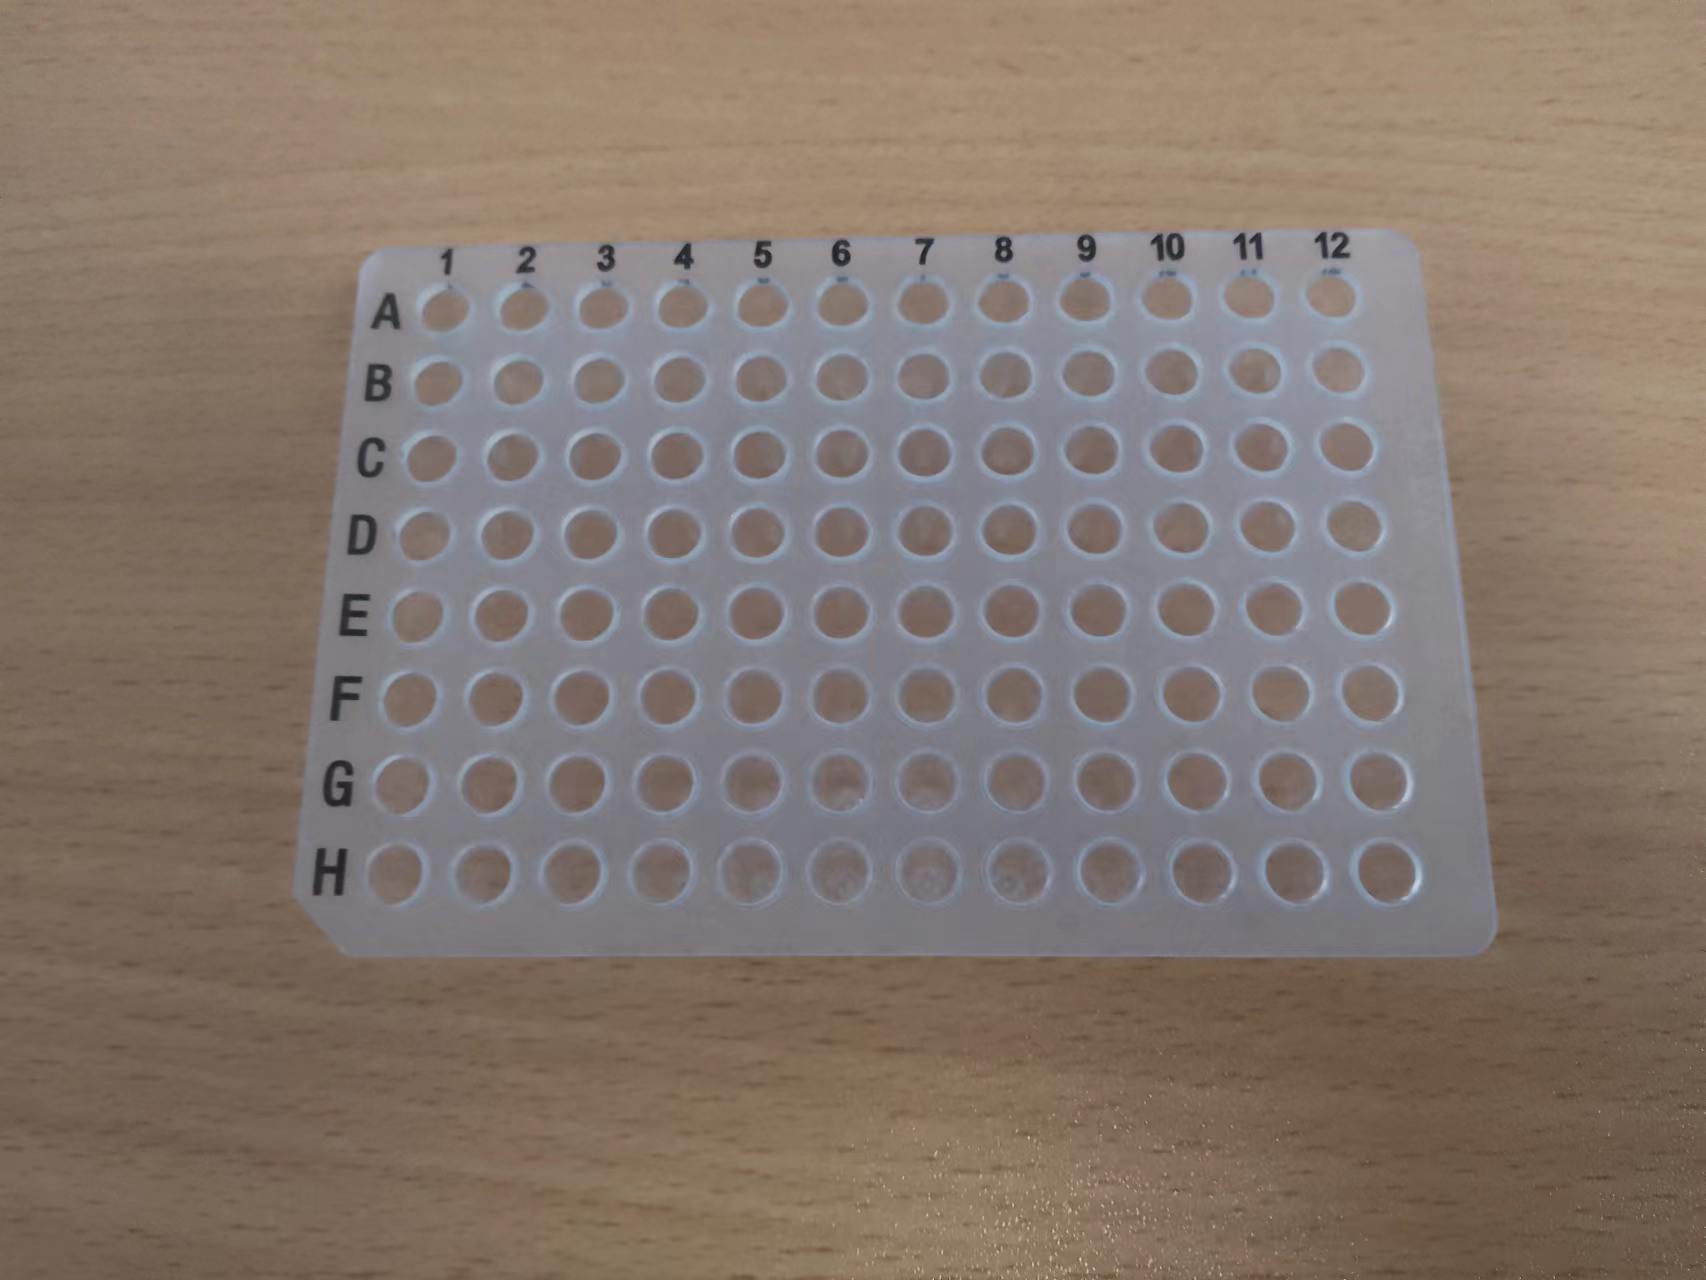 96-well PCR plate